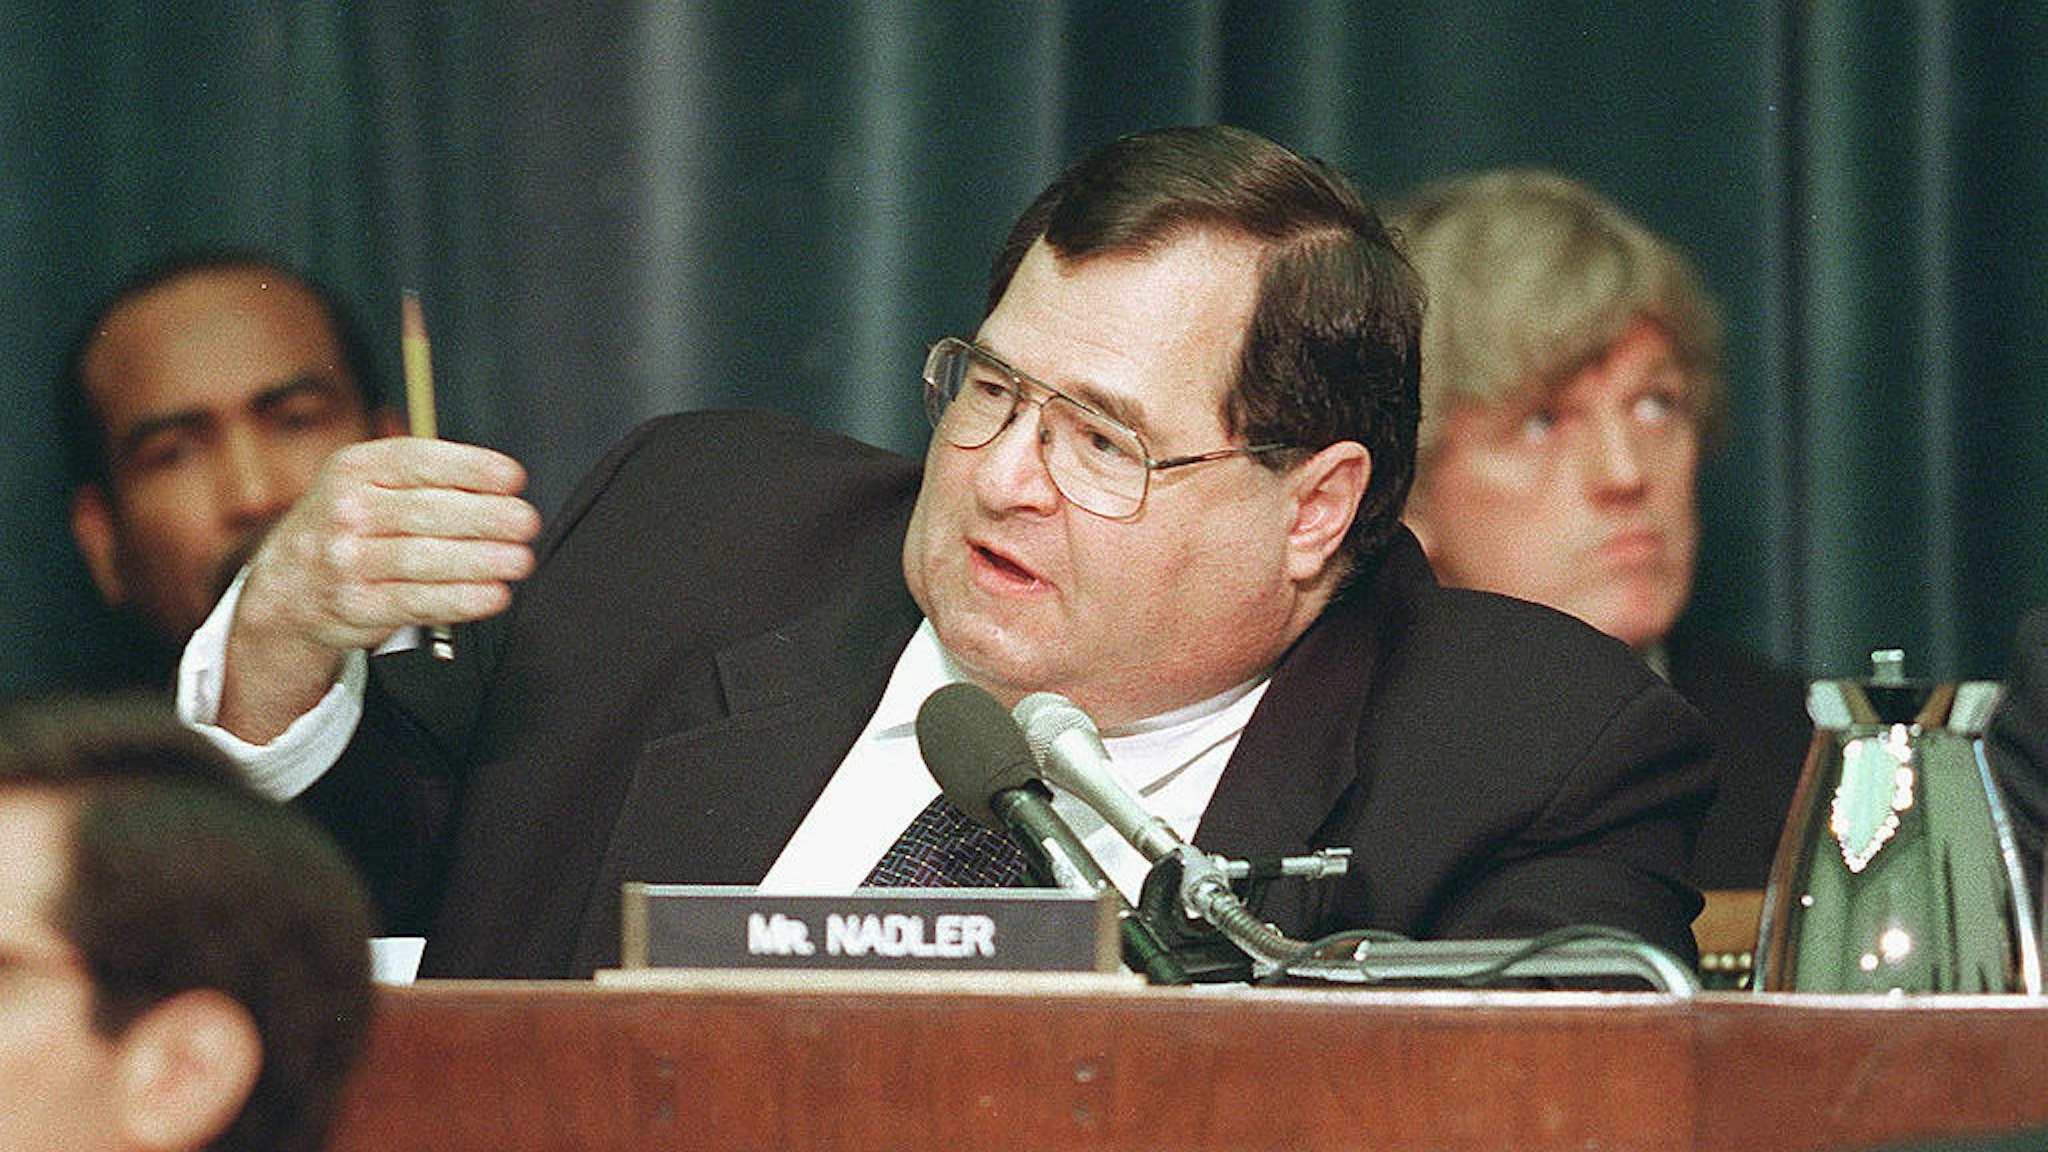 Jerrold Nadler,D-N.Y.,makes his opening statement during House Judiciary Committee hearing regarding articles of impeachment against President Bill Clinton. (Photo by Douglas Graham/Congressional Quarterly/Getty Images)